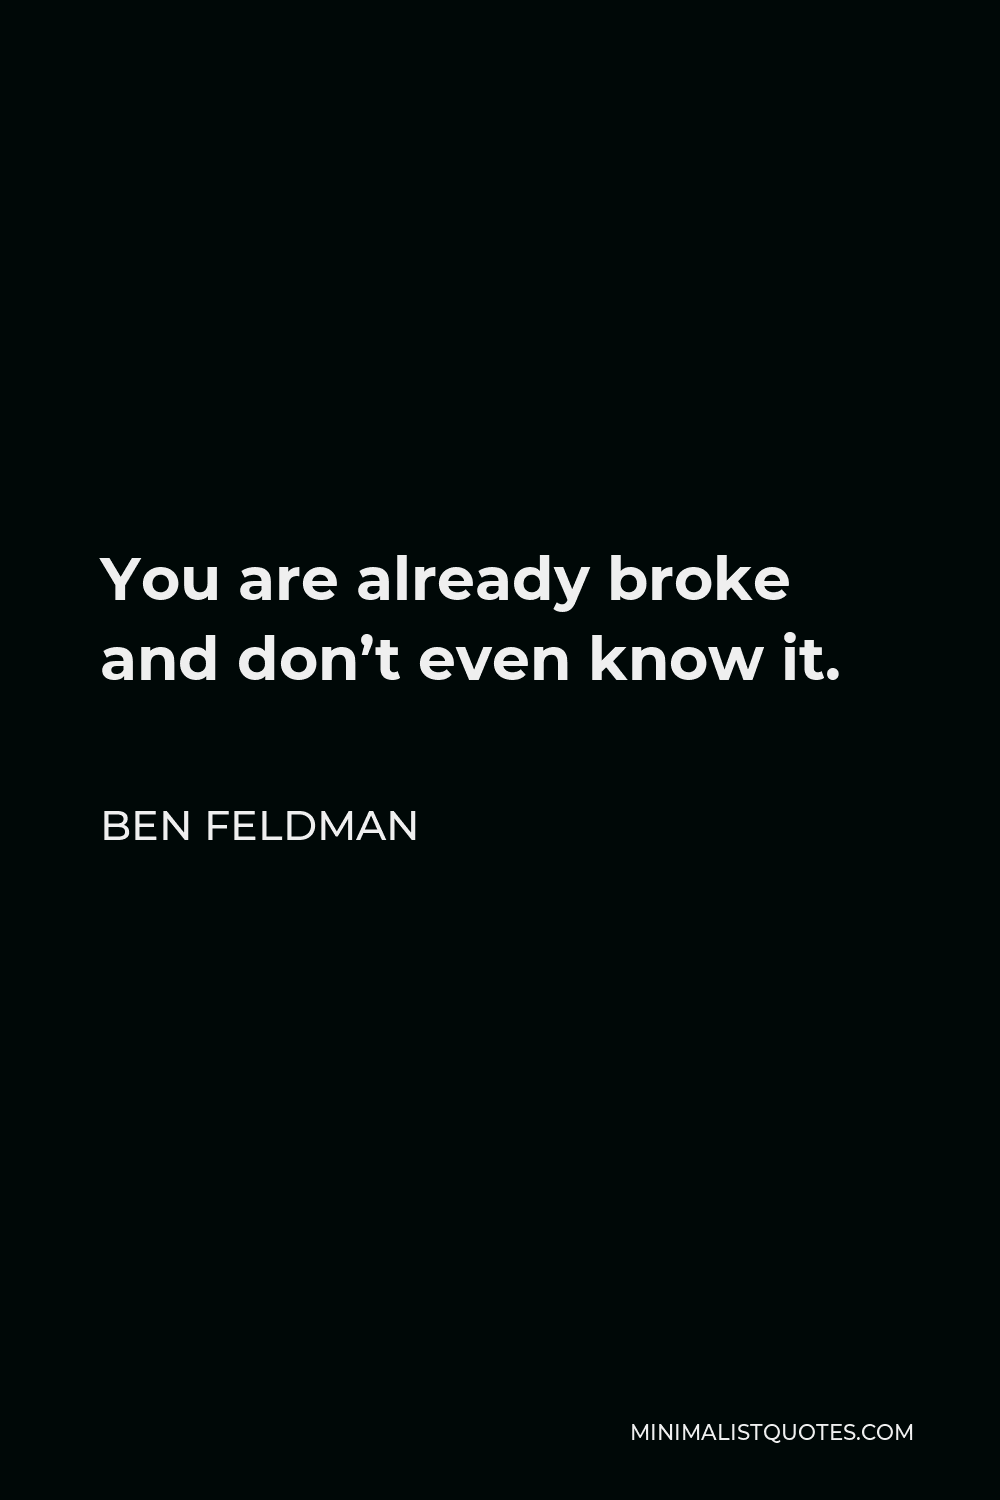 Ben Feldman Quote - You are already broke and don’t even know it.